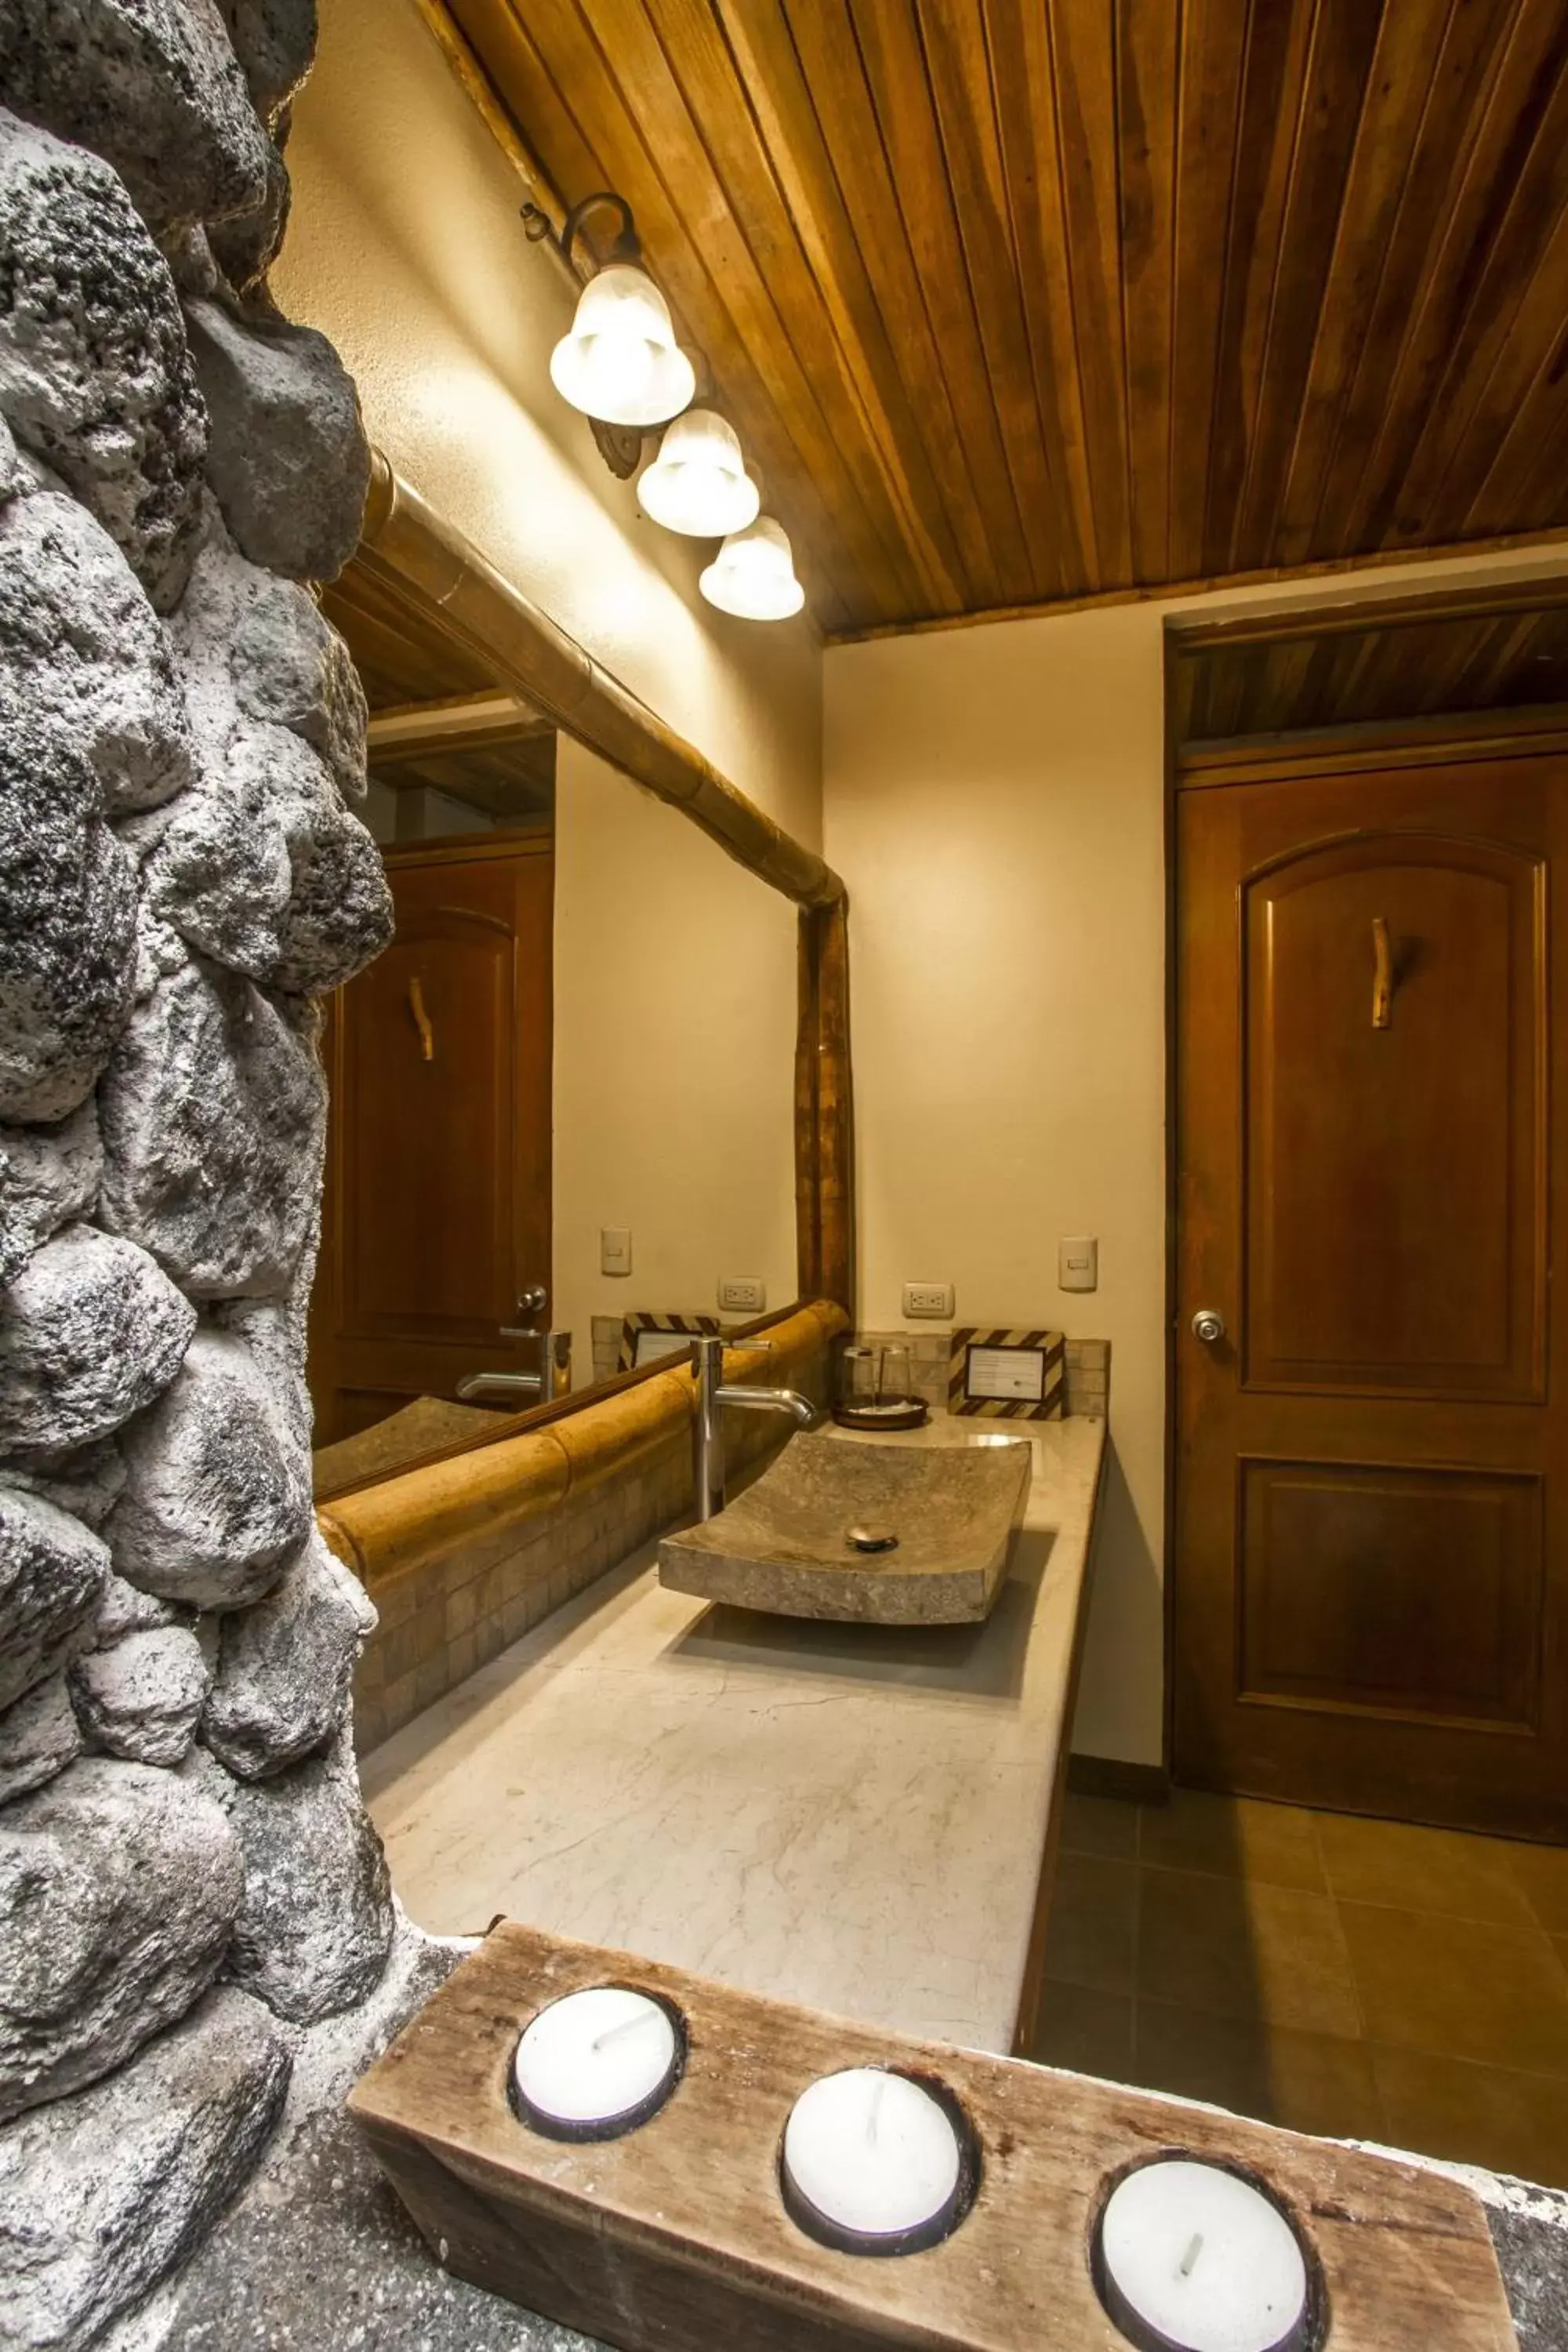 Bathroom in Lost Iguana Resort and Spa